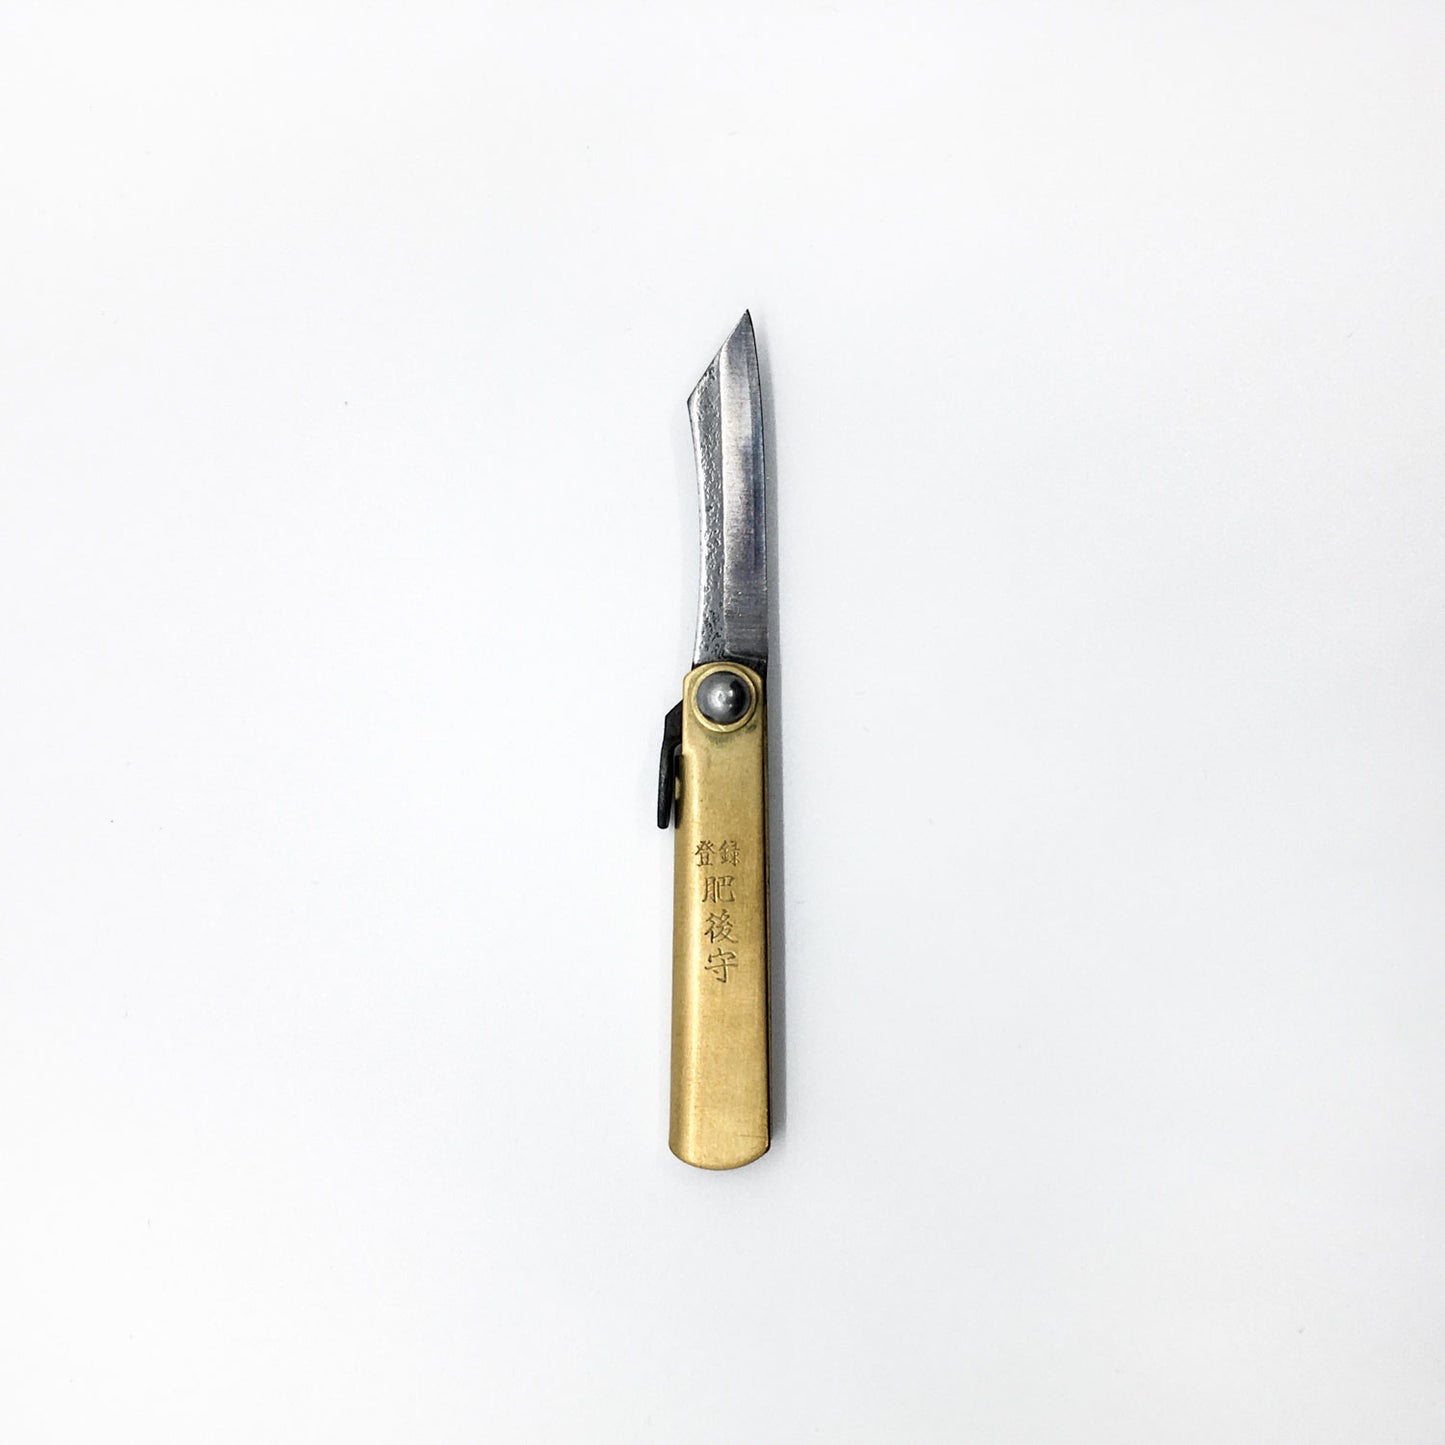 a gold foldable pocket knife with japanese writing embossed logo on handle